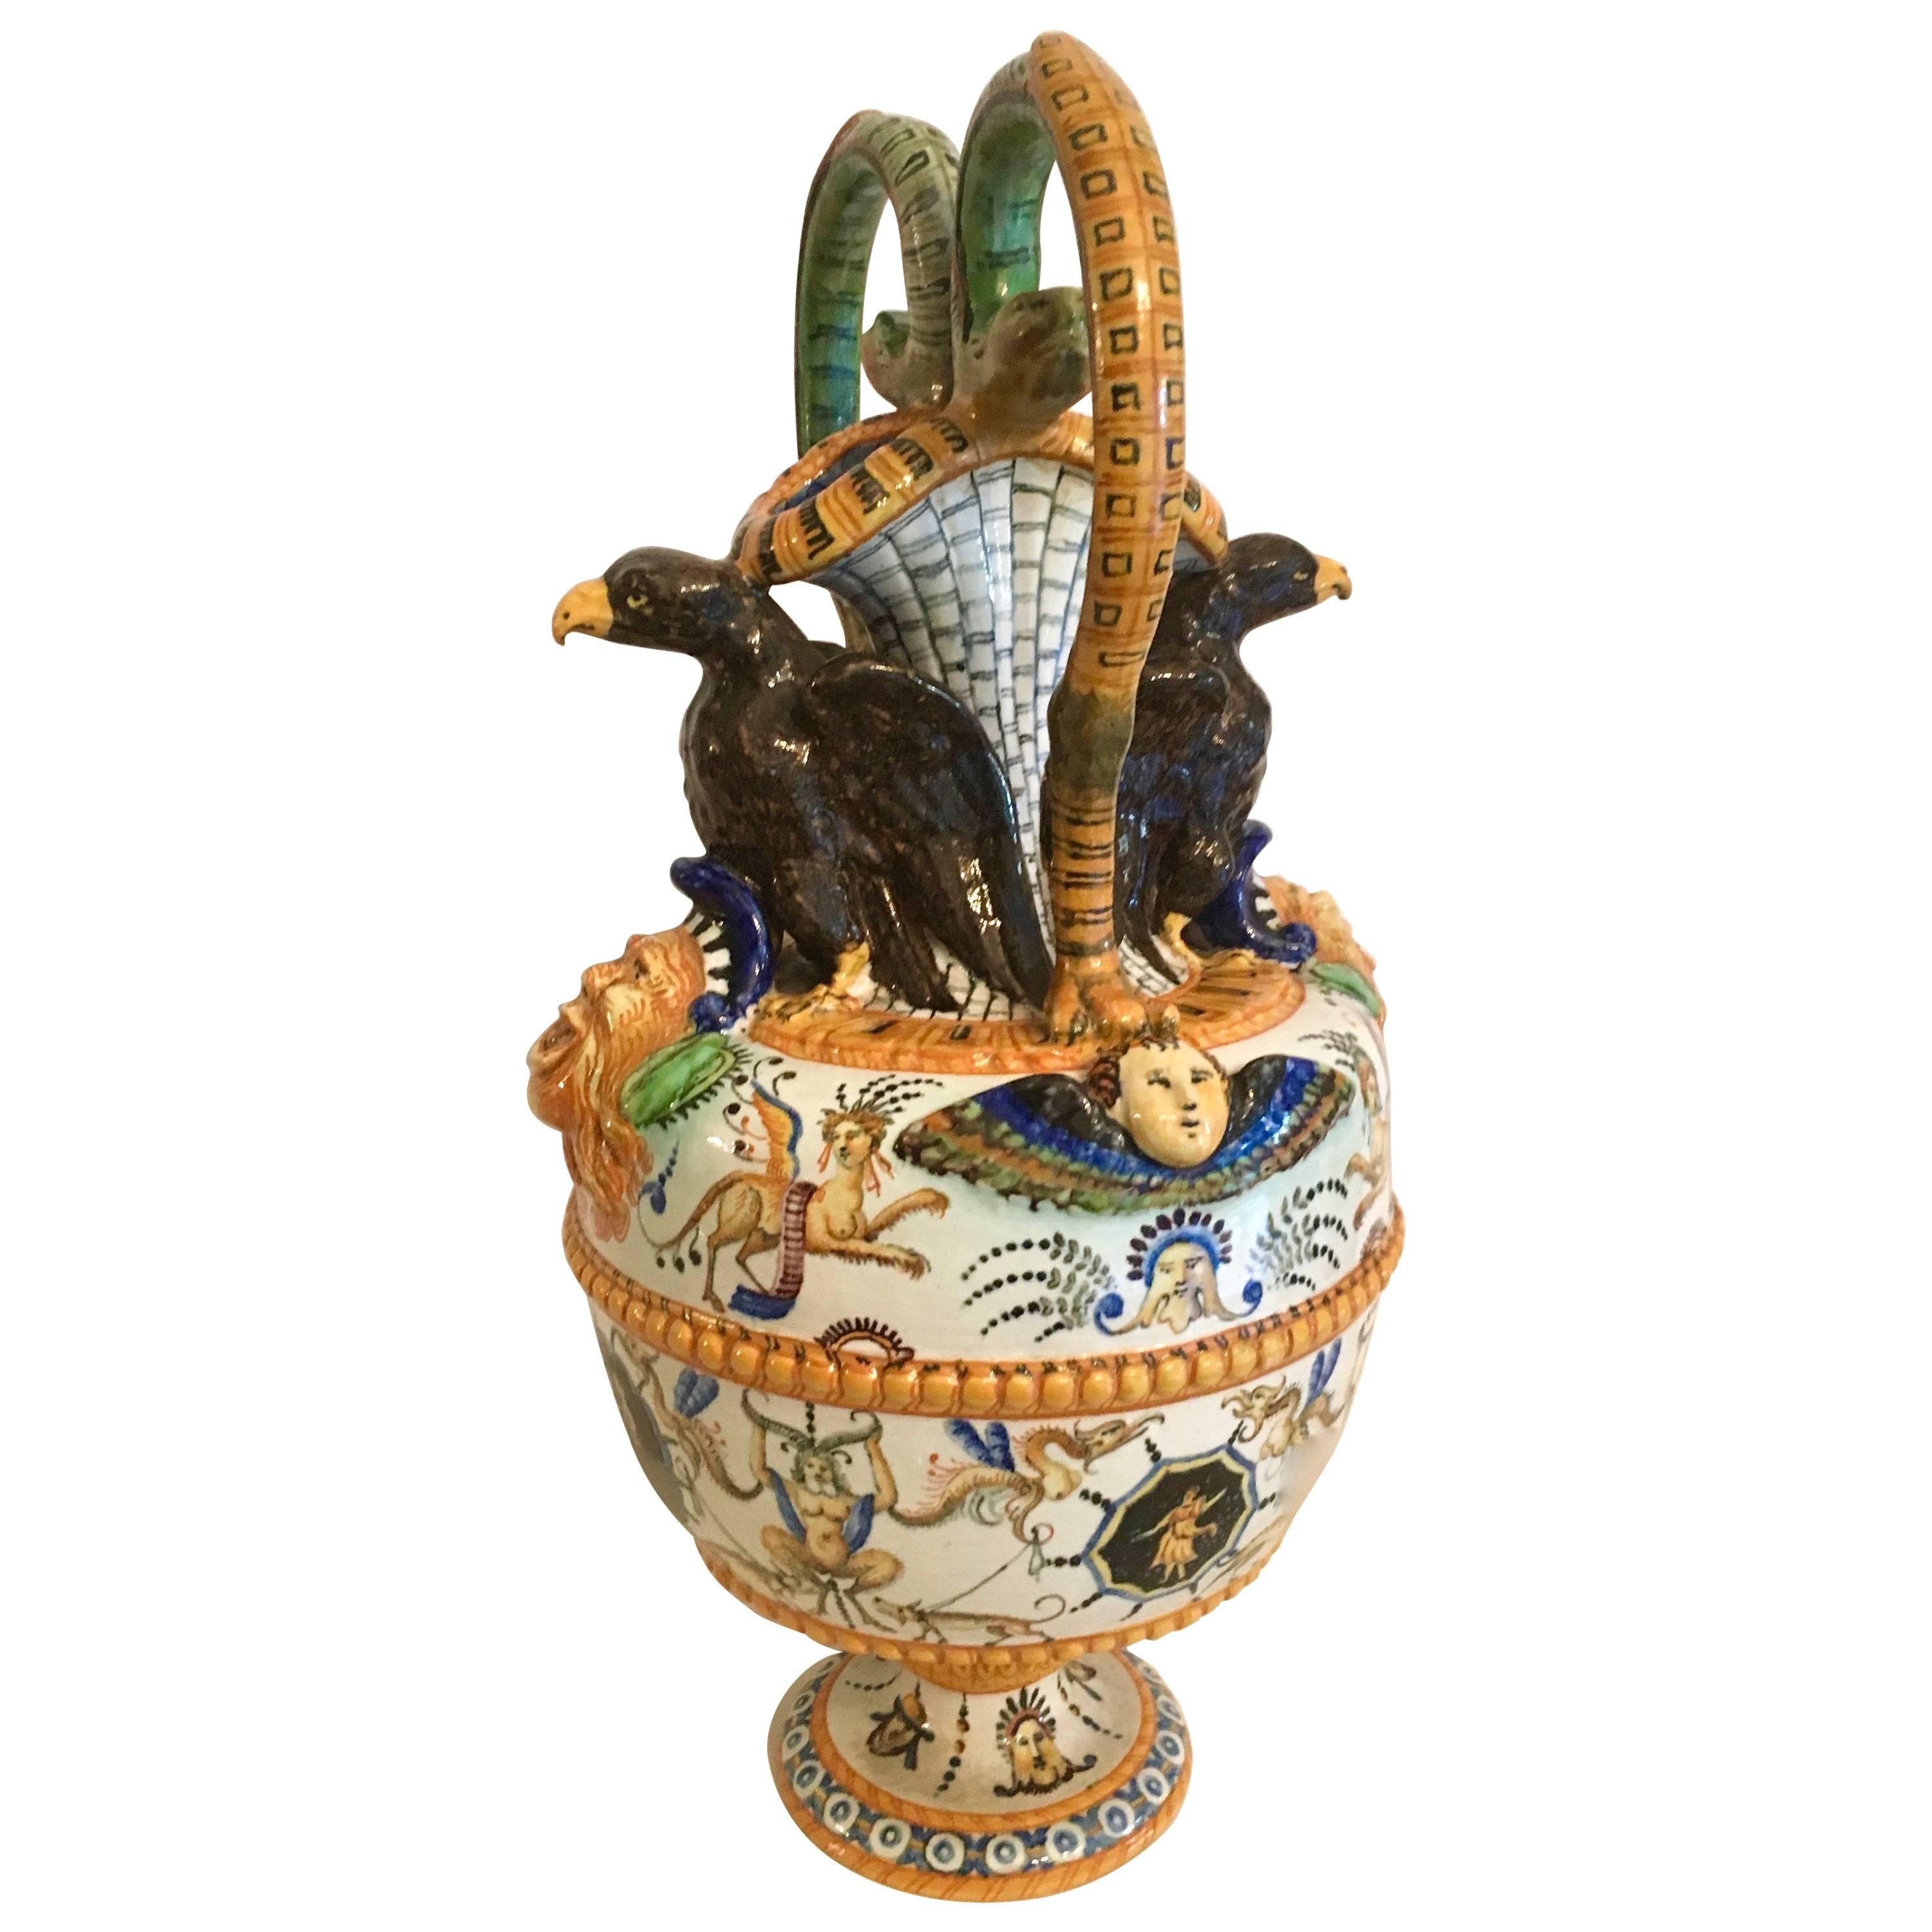 Exceptional Majolica Urn Vase with Serpent Handles and Mythological Figures For Sale